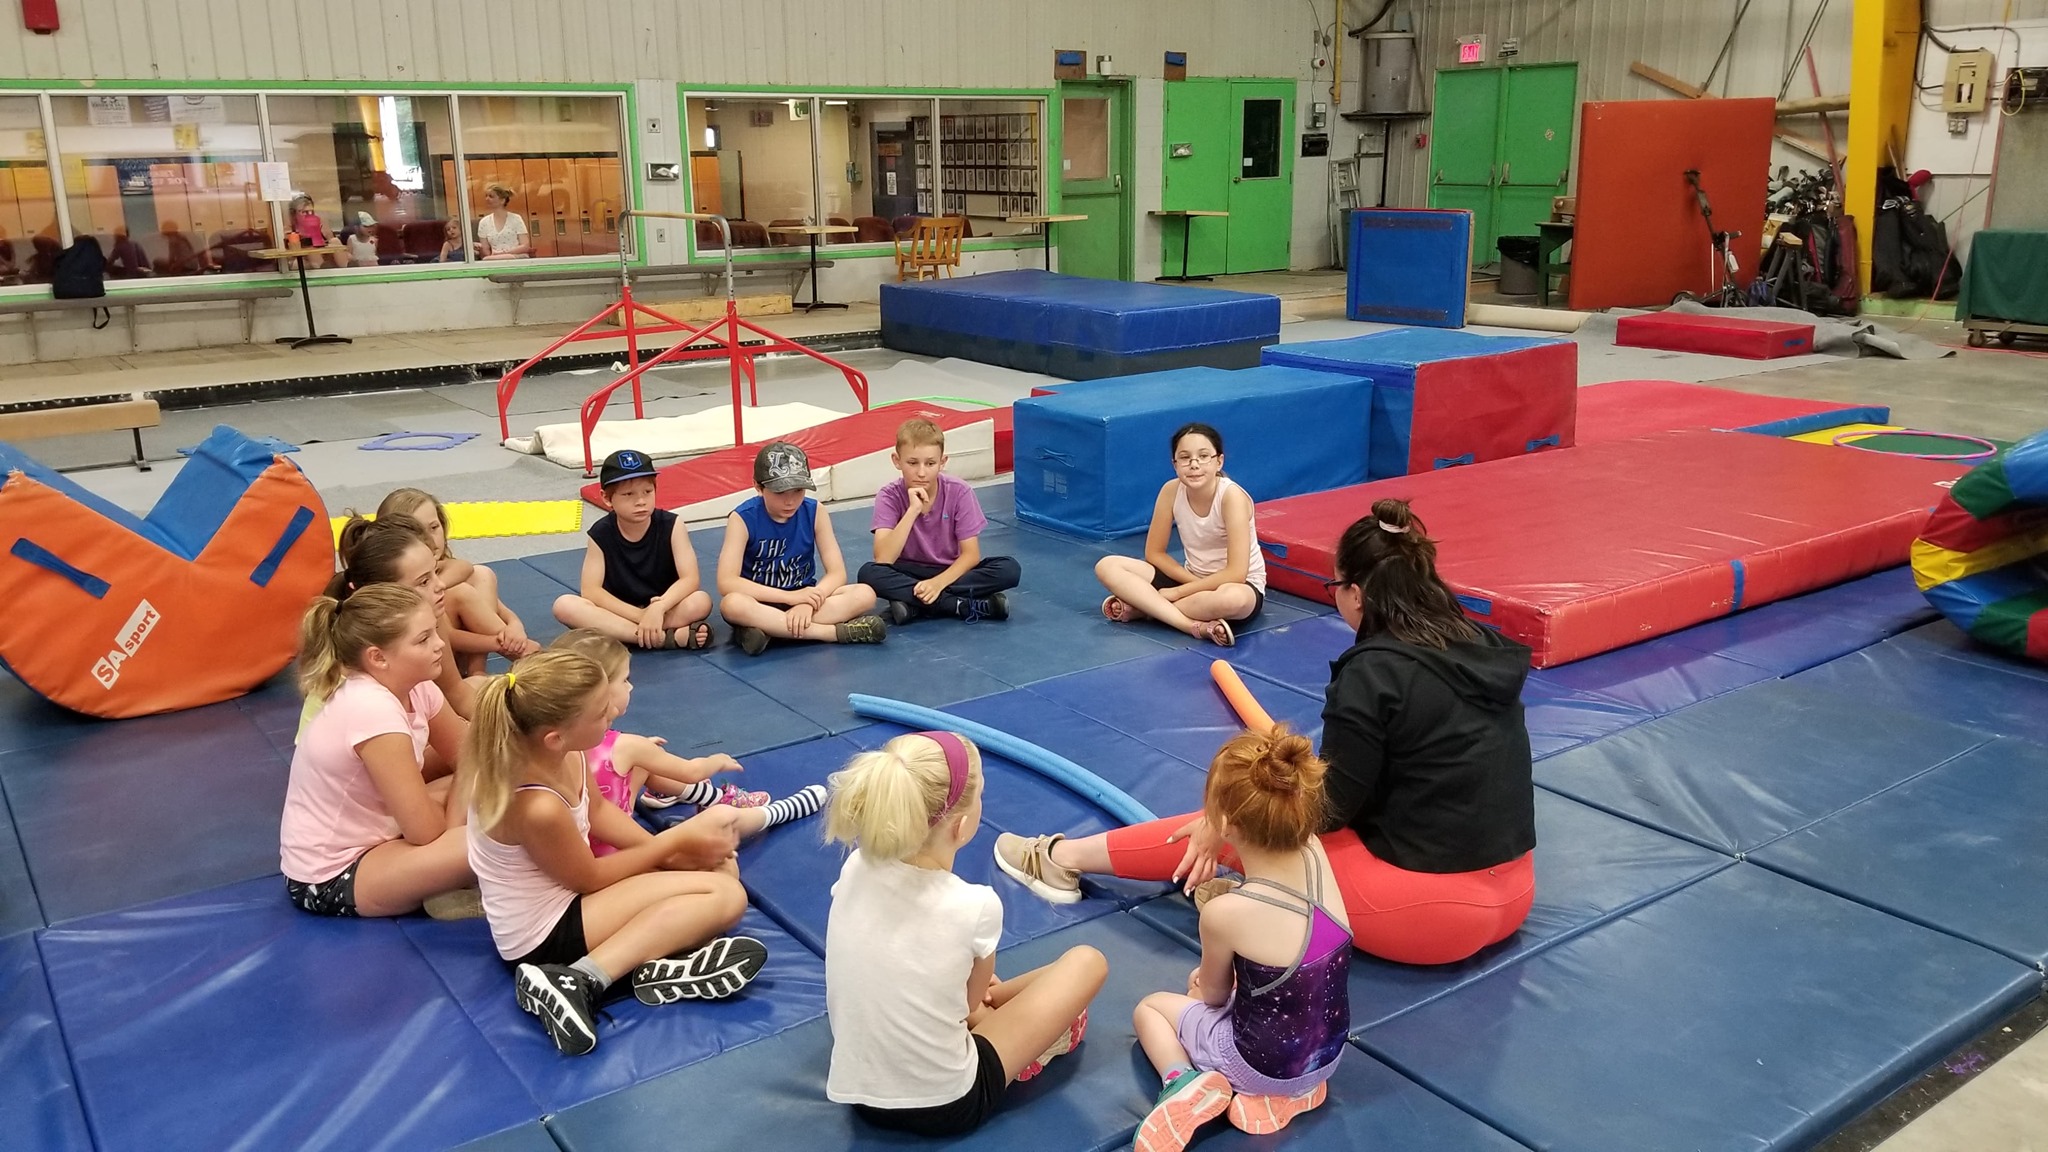 children and coaches sit in a circle in a gym full of colourful mats and climbing apparatuses.